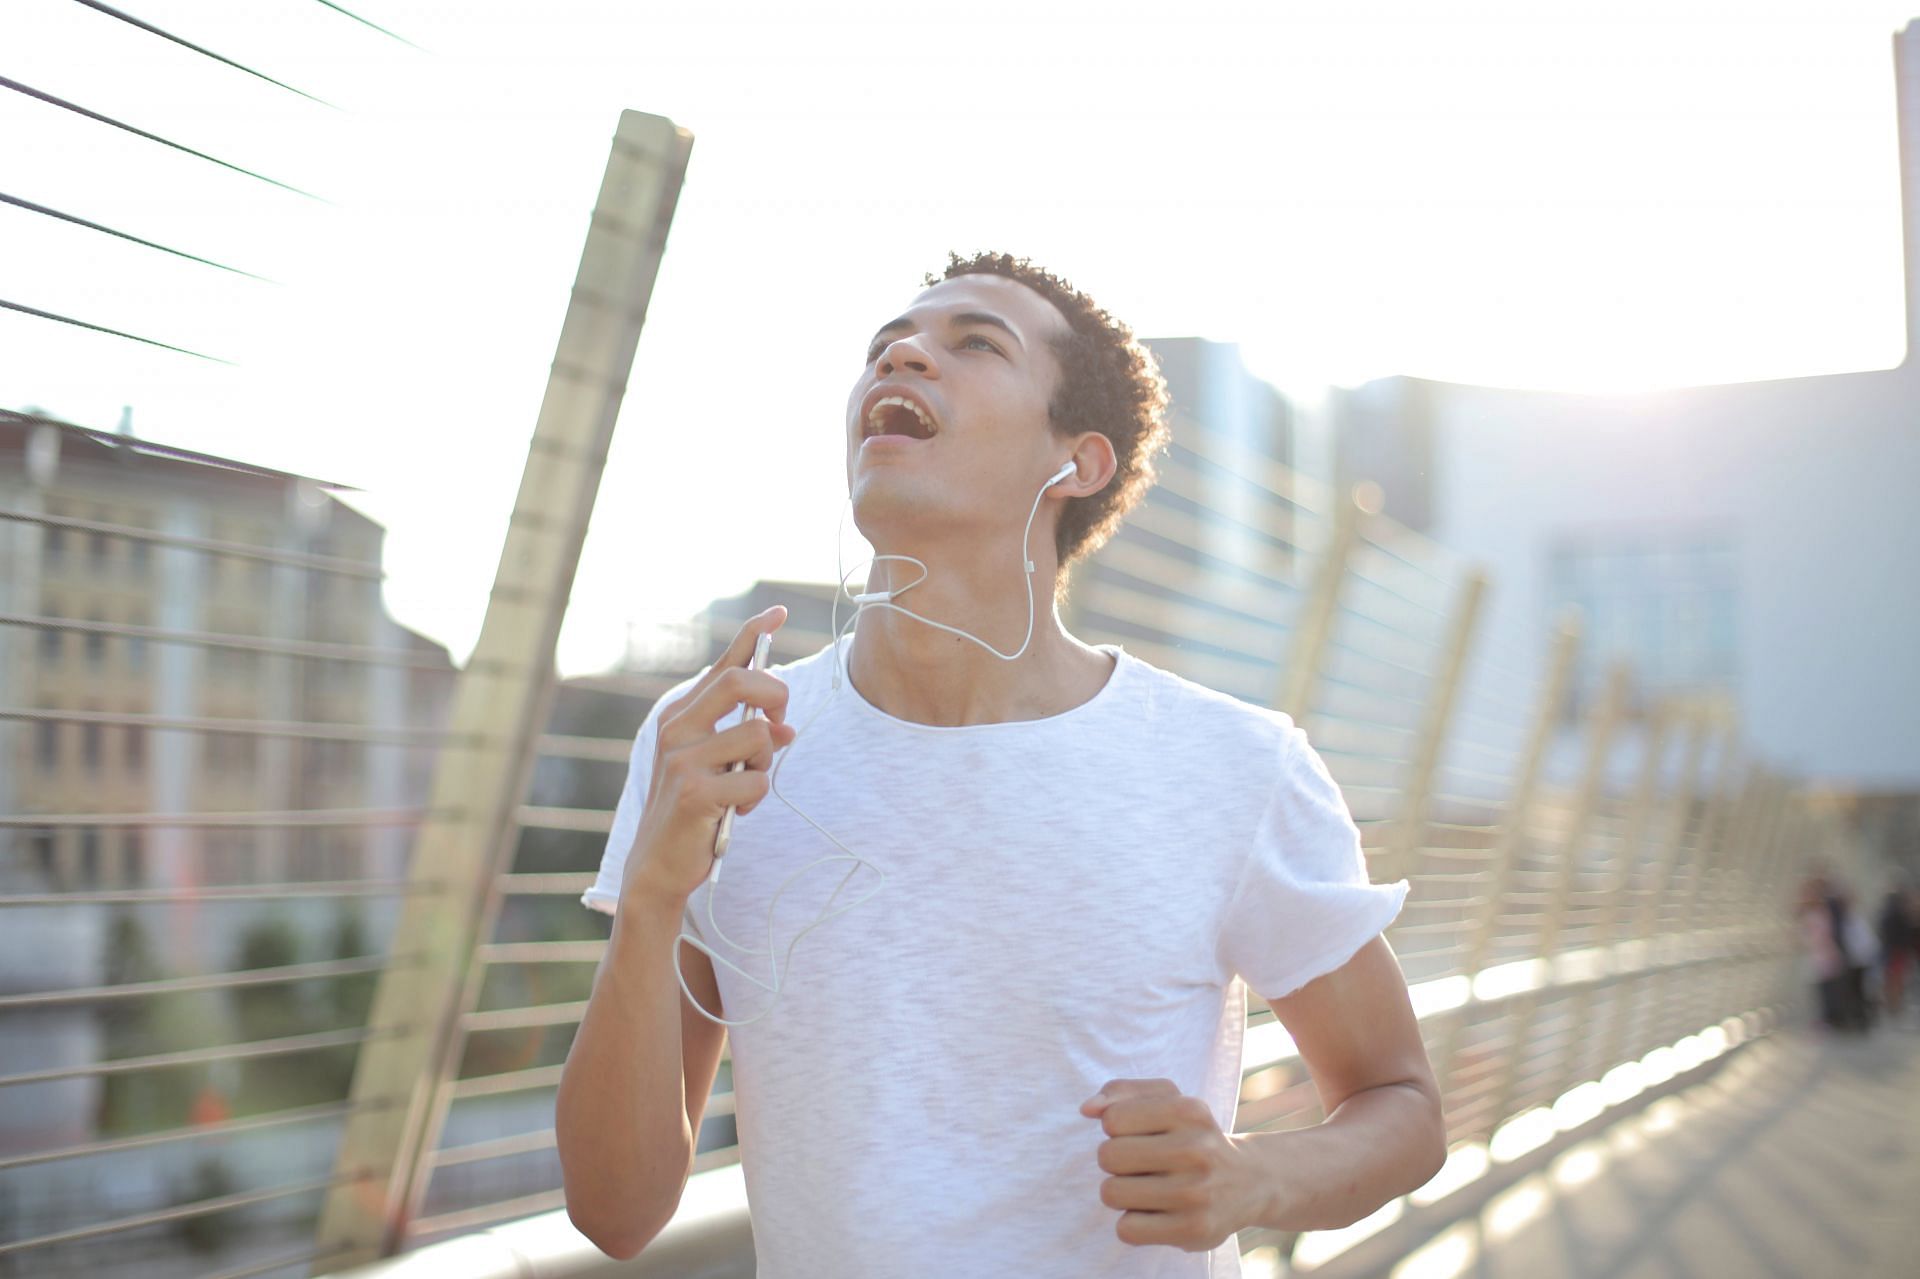 Exercises for Vocal Cords (Image sourced via Pexels / Photo by piacquadio)